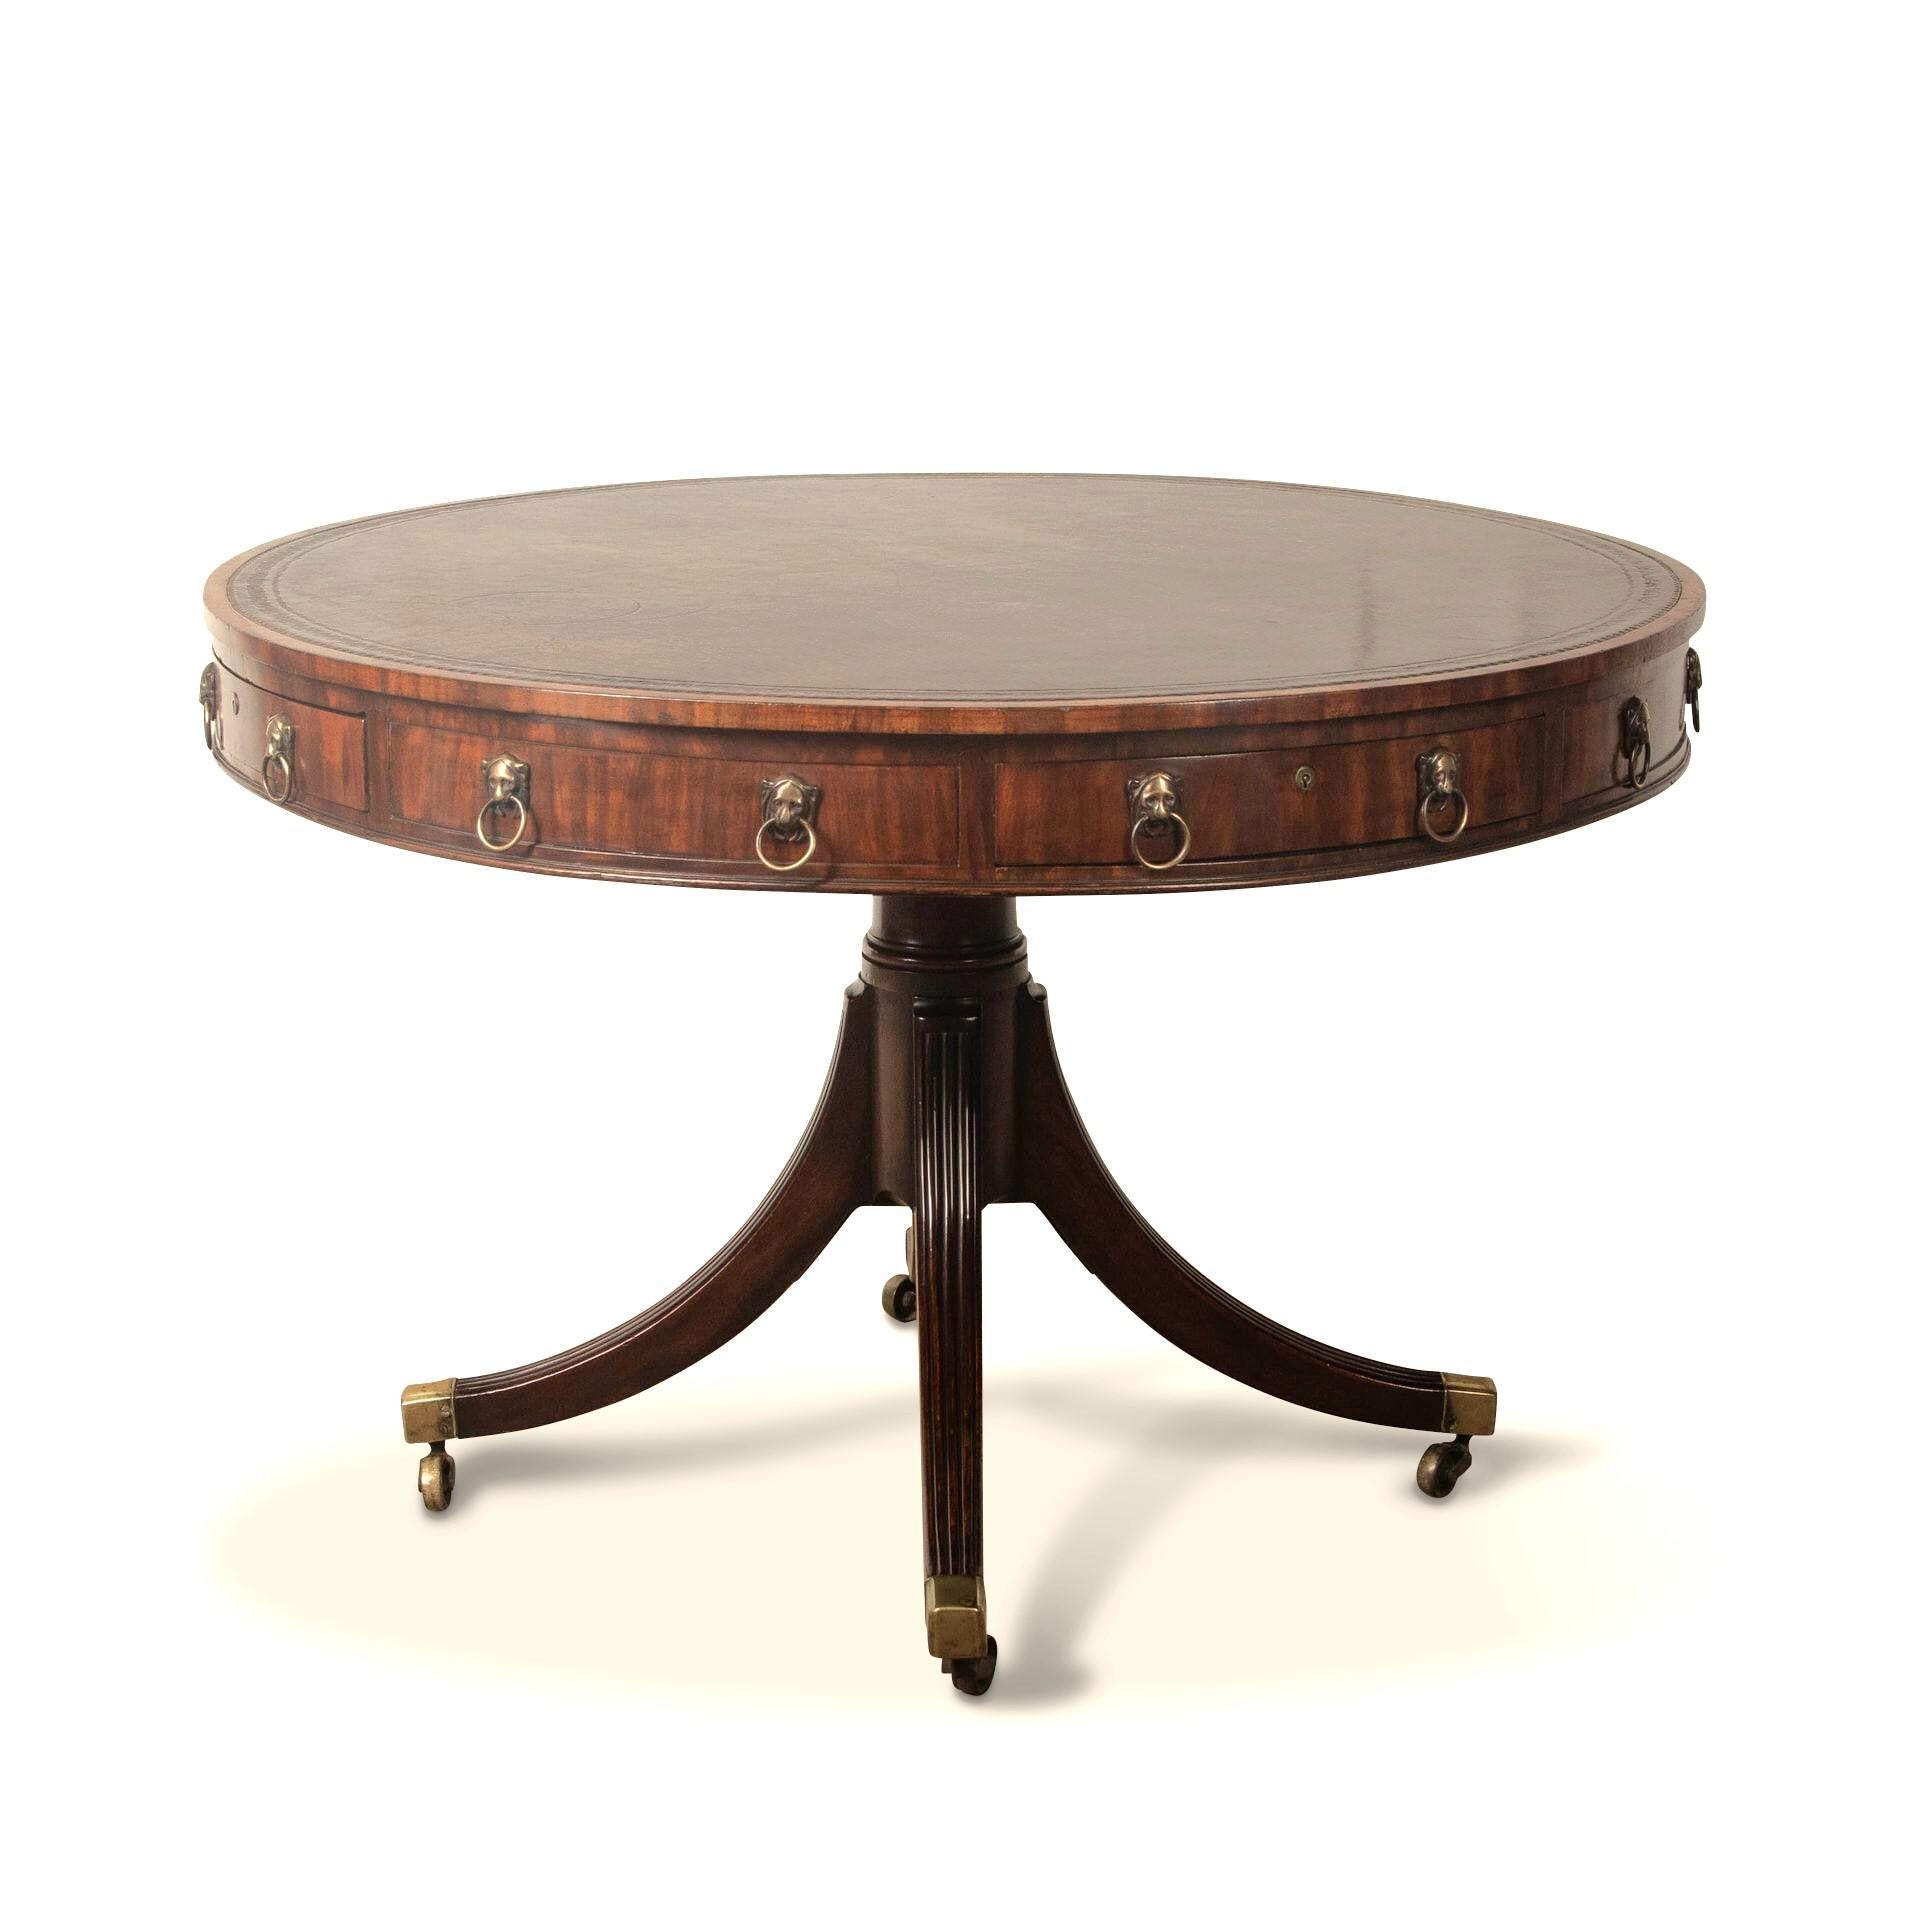 A good Regency mahogany drum table, the revolving top and crossbanded edge with tooled leather inset and above an arrangement of 4 drawers and 4 dummy drawers with original brass leopard head handles and moulded frieze. All raised on on a turned